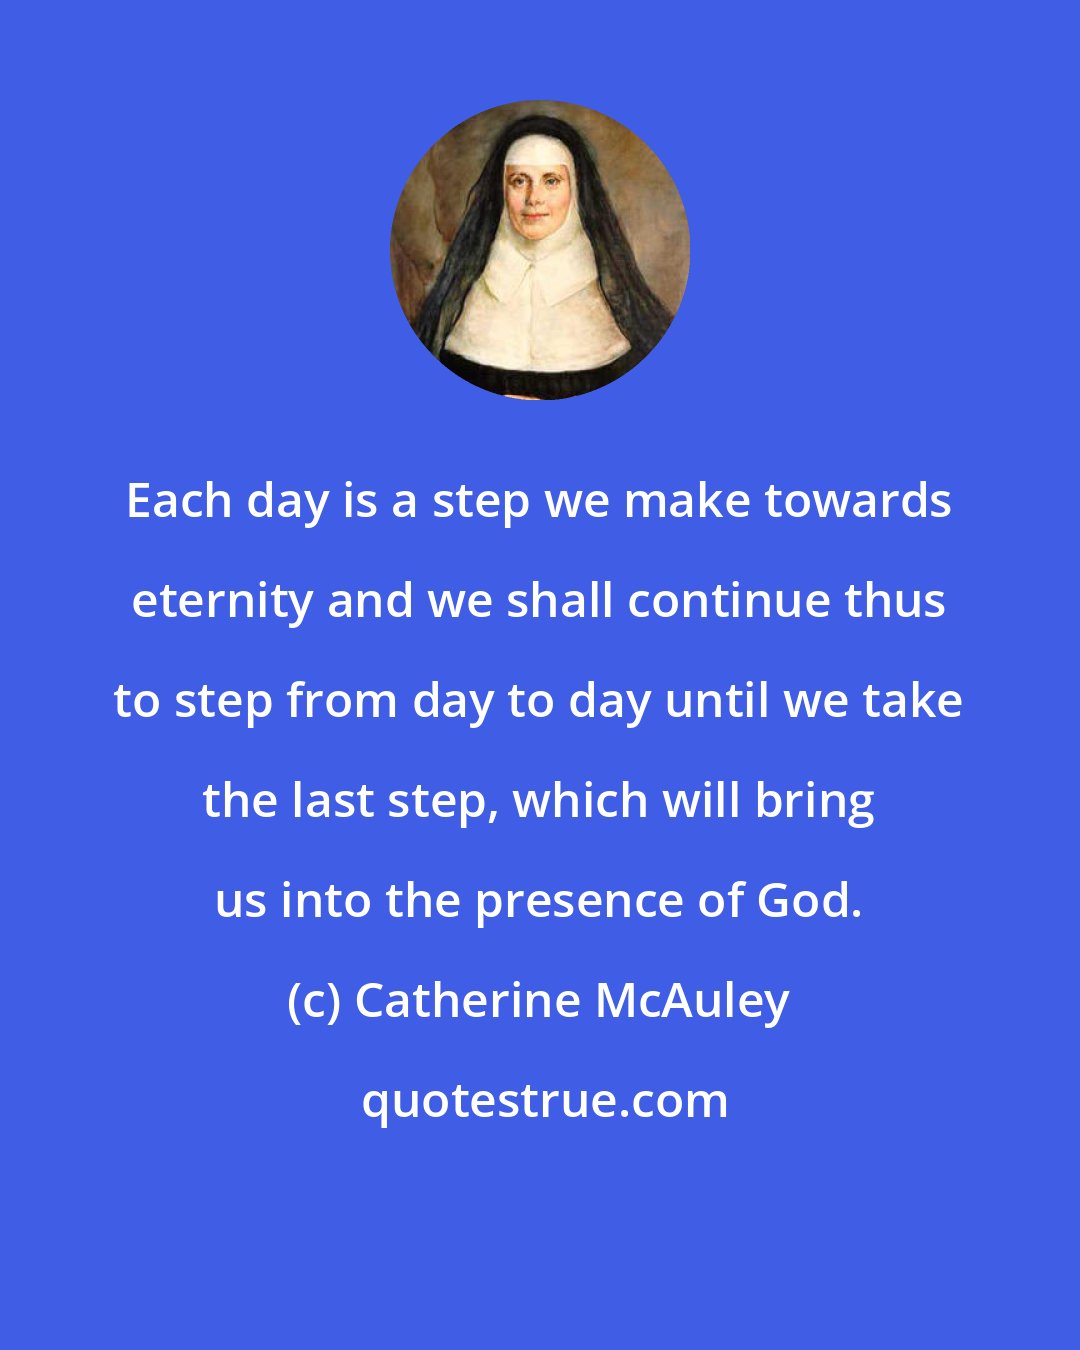 Catherine McAuley: Each day is a step we make towards eternity and we shall continue thus to step from day to day until we take the last step, which will bring us into the presence of God.